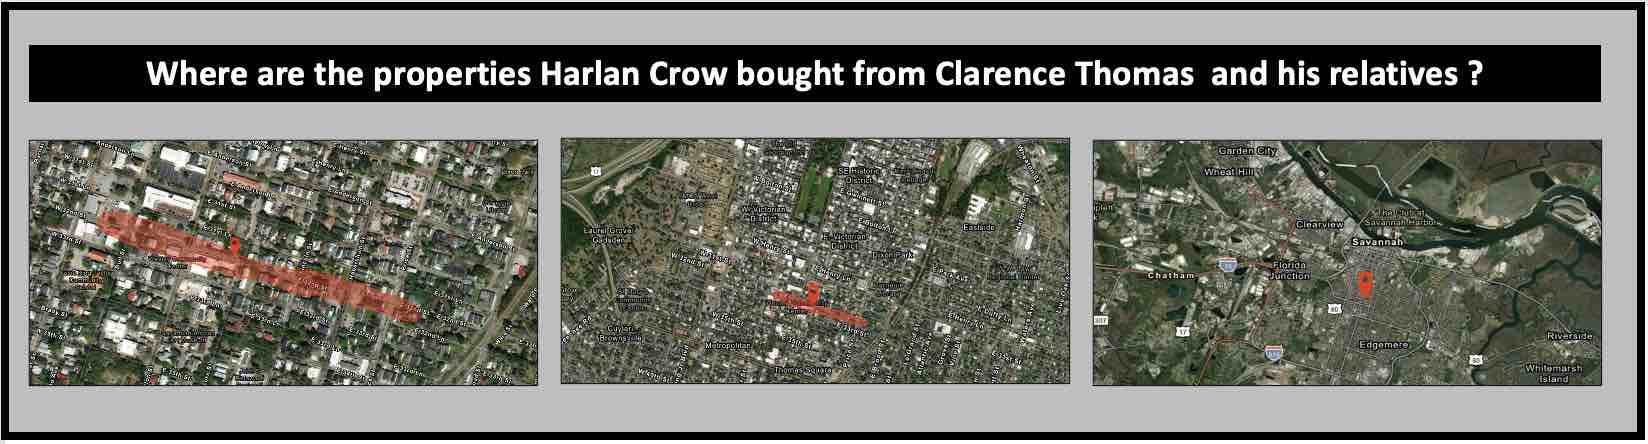 Where are the properties that Harlan Crow bought from Clarence Thomas and his family members.